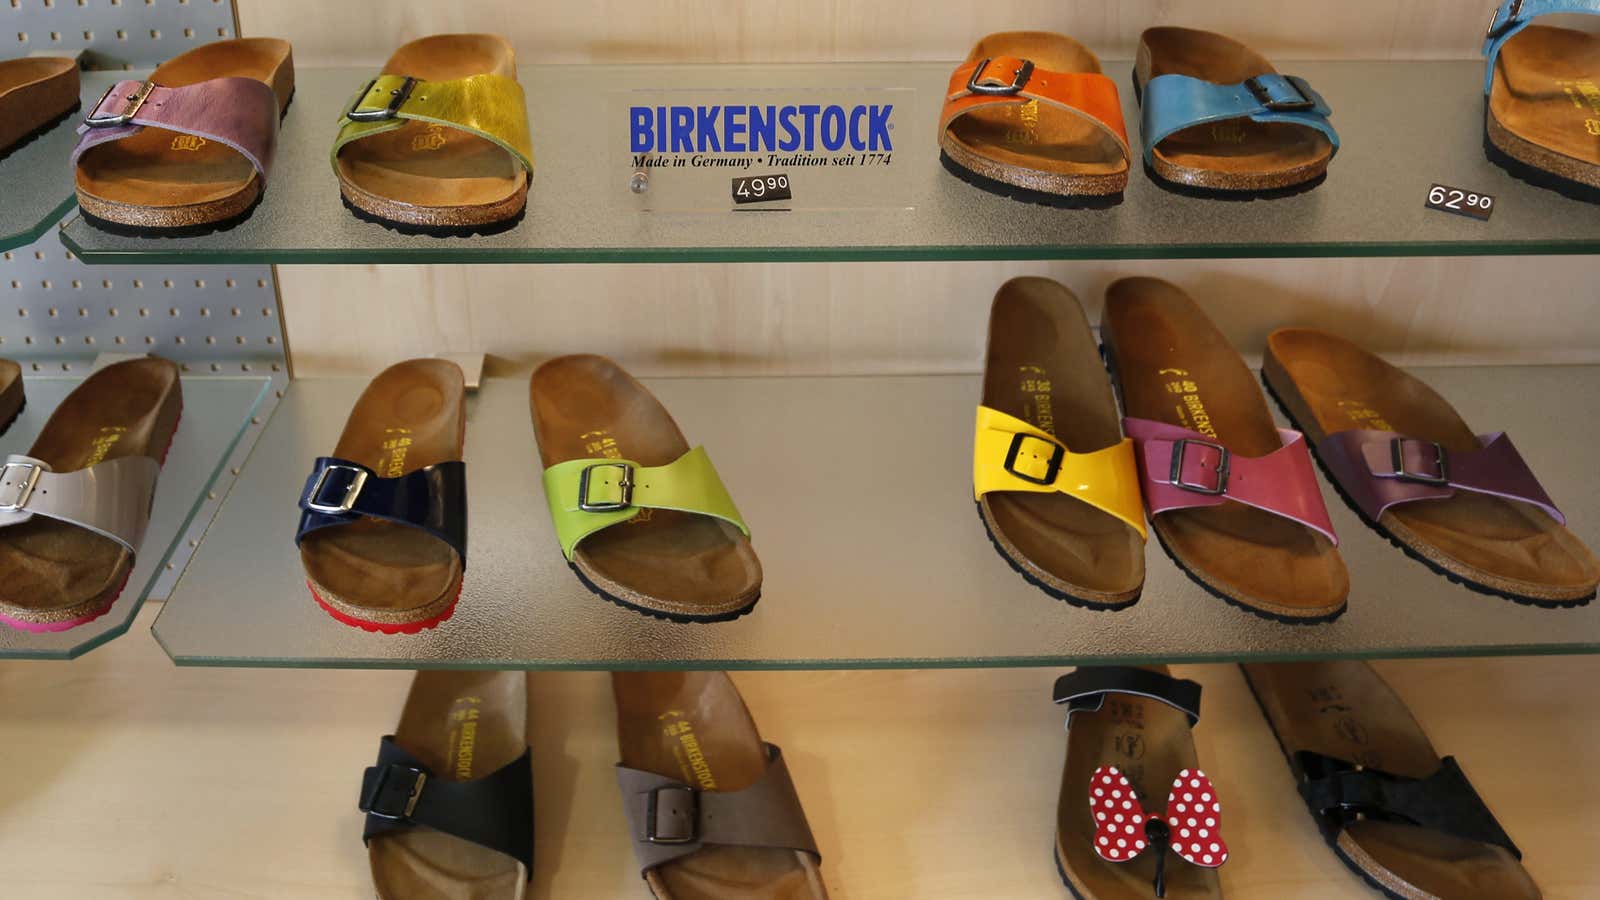 Germany tells  to quit luring Birkenstock shoppers who misspell the  sandals in Google